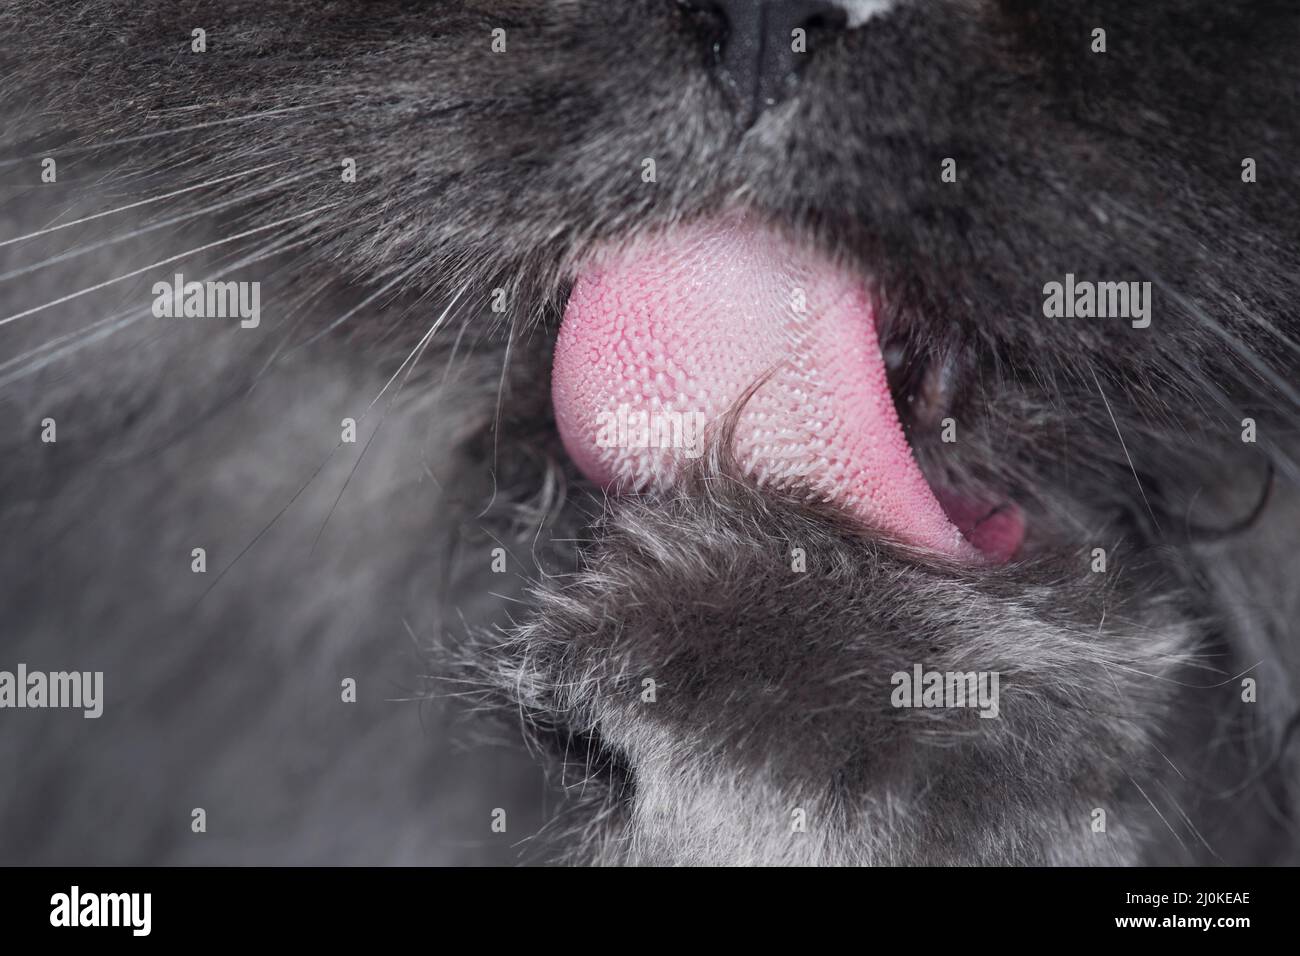 Super detailed close up macro of a long haired grey cat washing his paws. Stock Photo